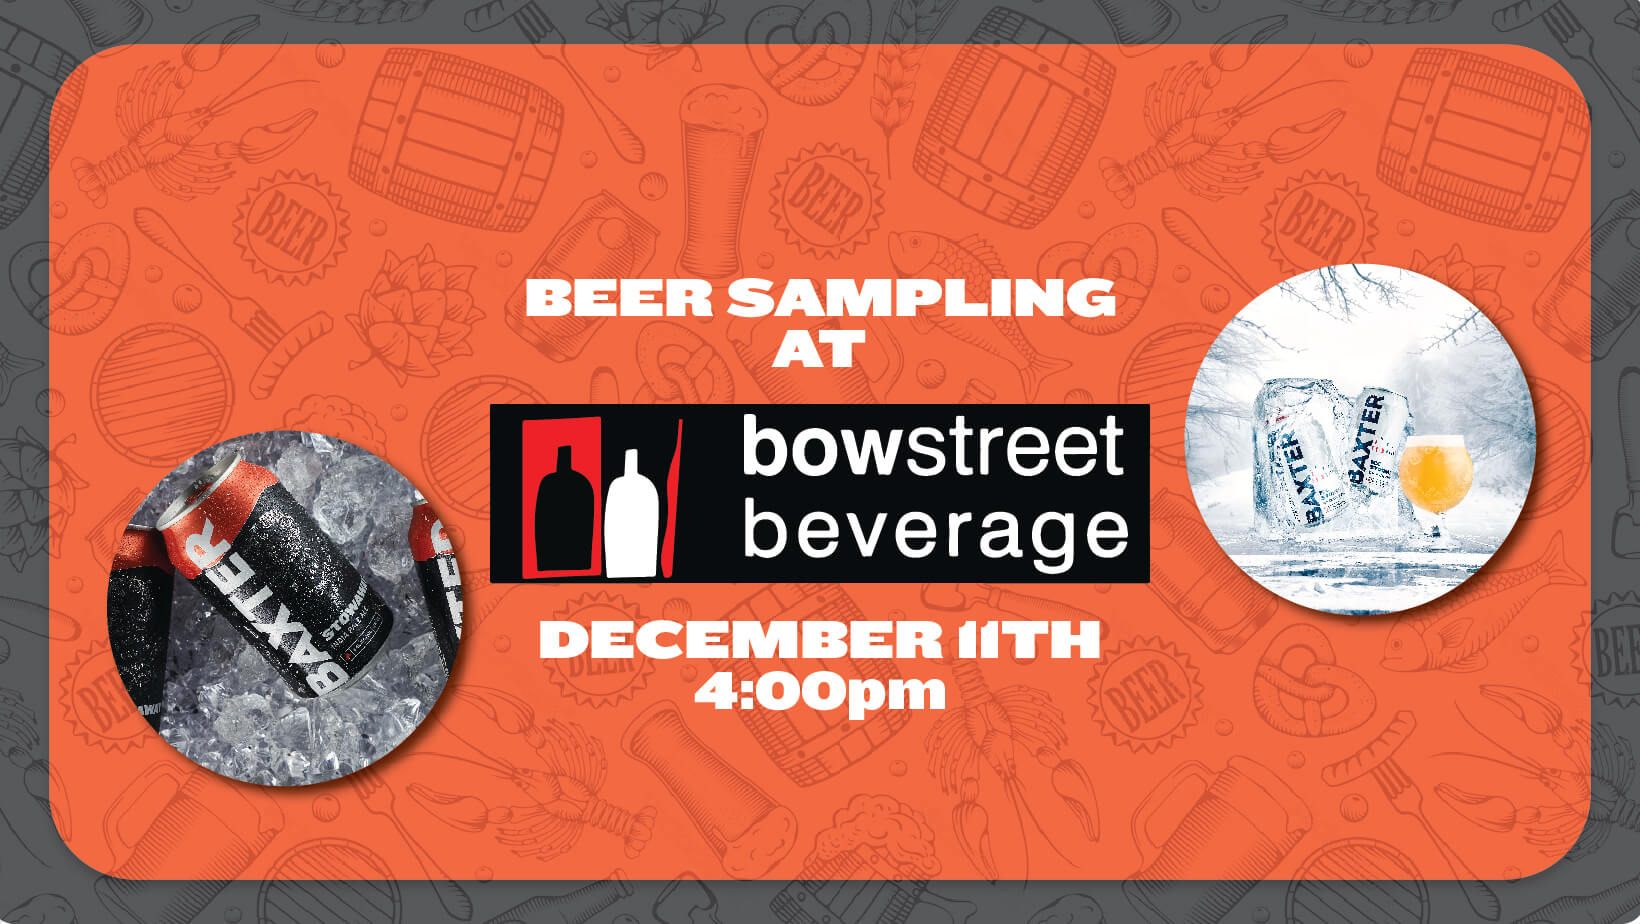 image promoting a beer sampling on December 11th, at Bow Street Portland